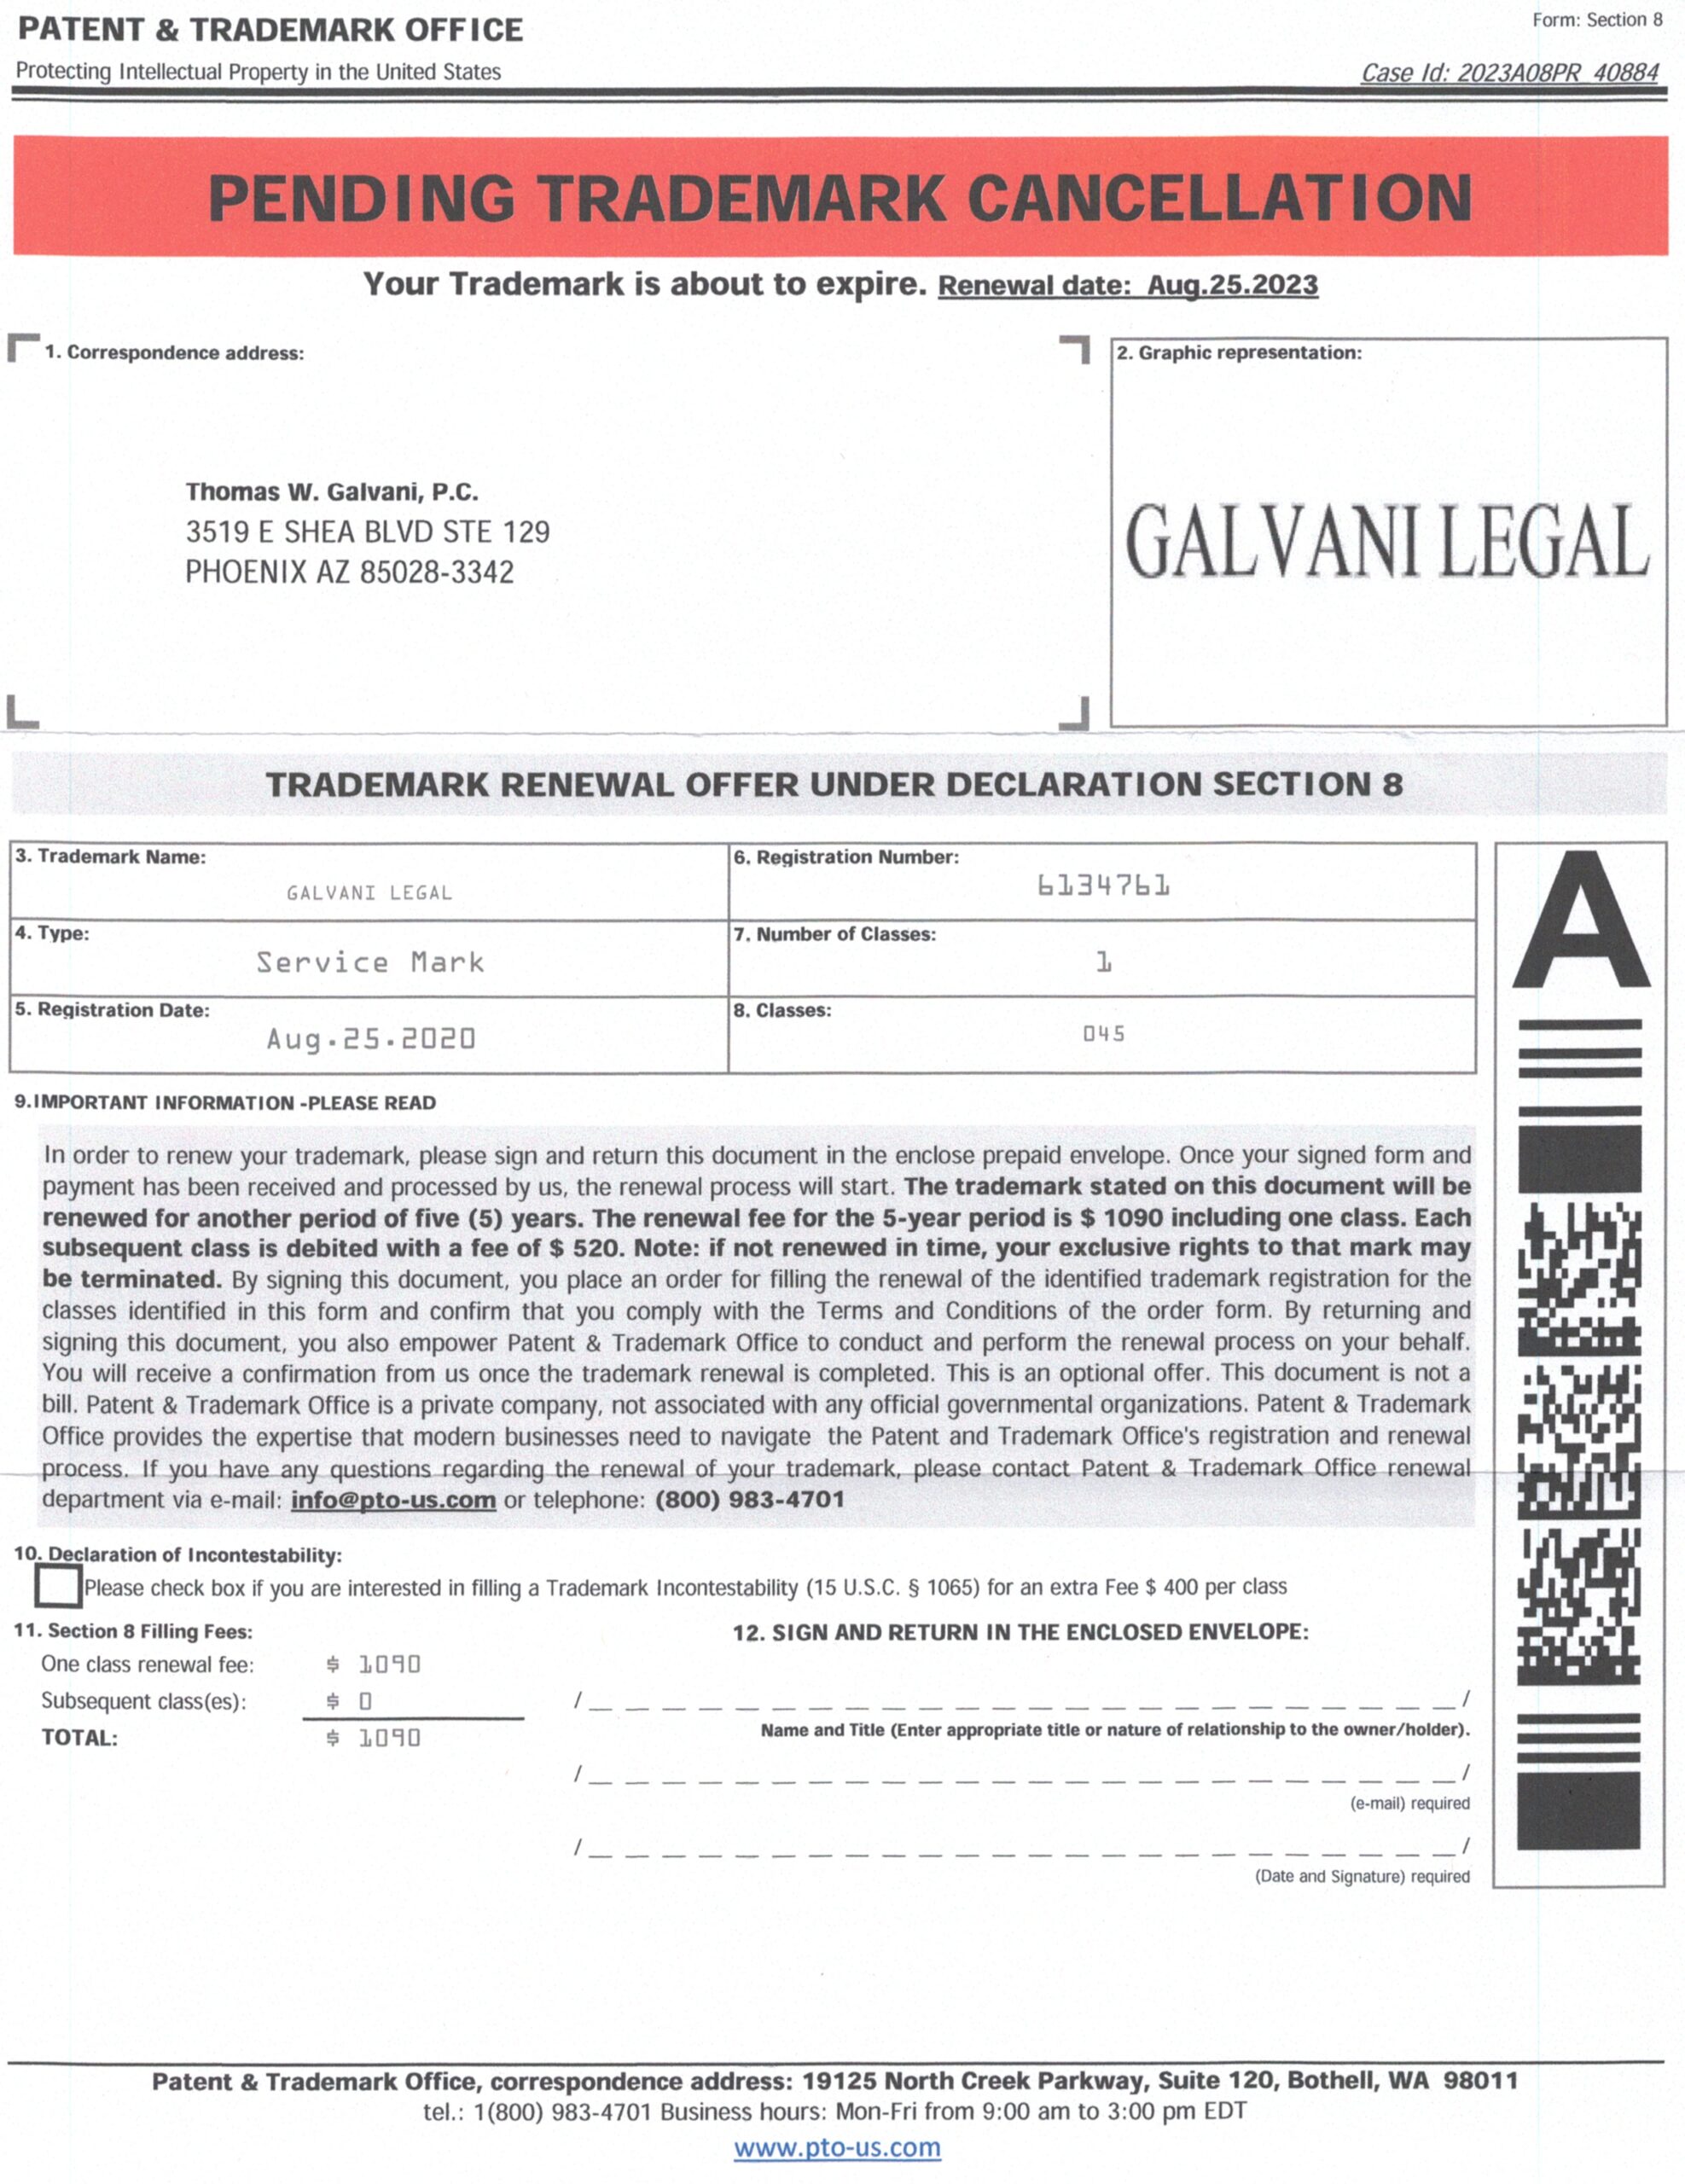 A scan of a Trademark Cancellation Notice